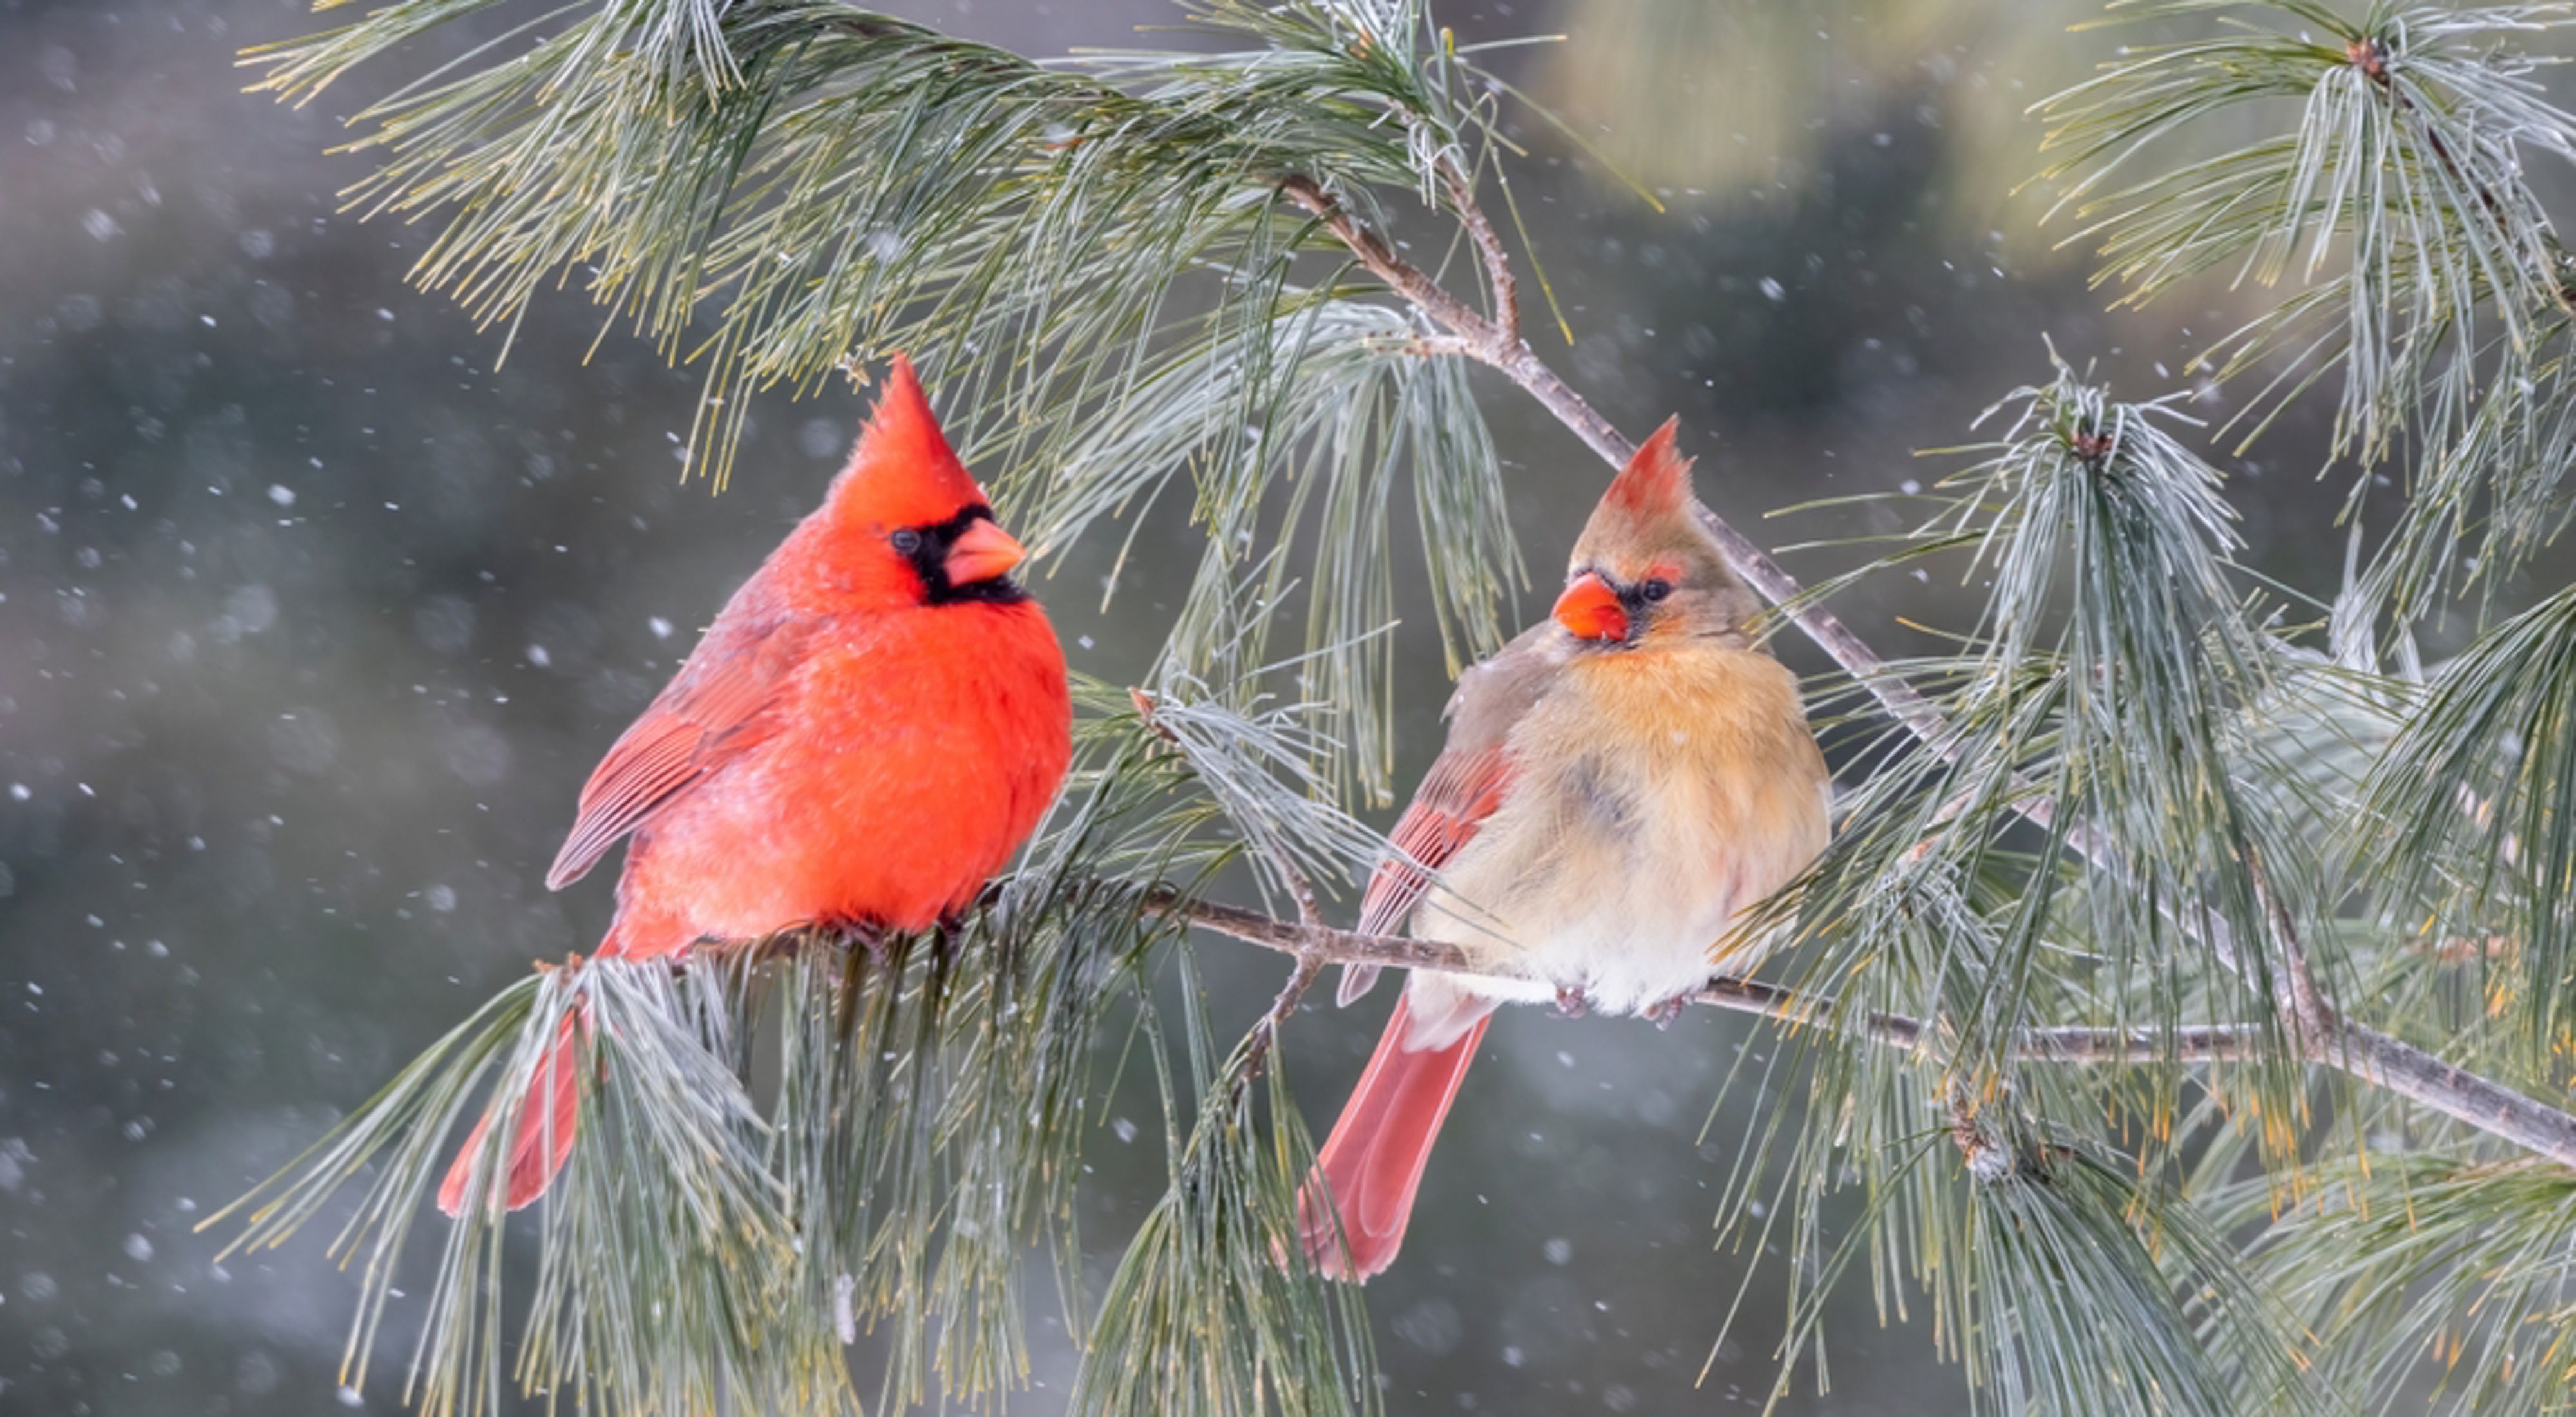 A male and female cardinal perch together on a snow-covered pine branch.